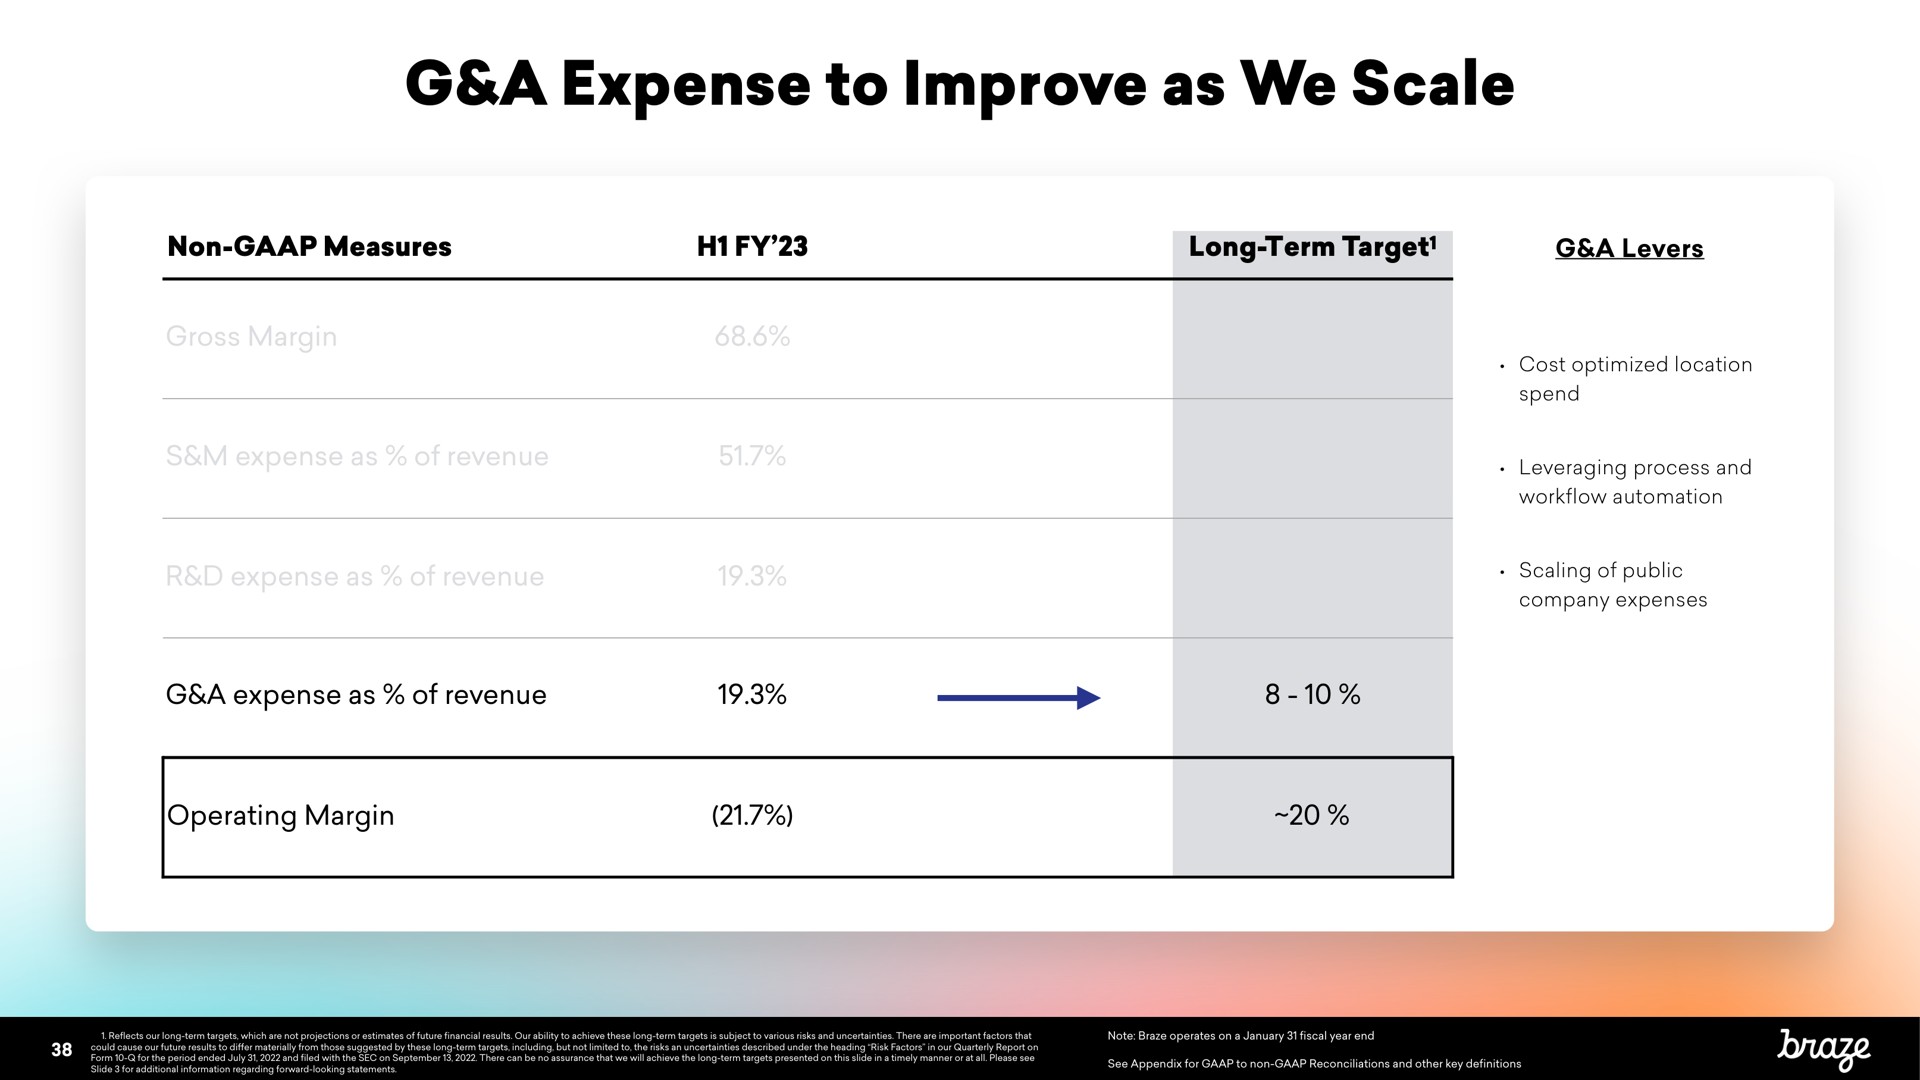 a expense to improve as we scale | Braze